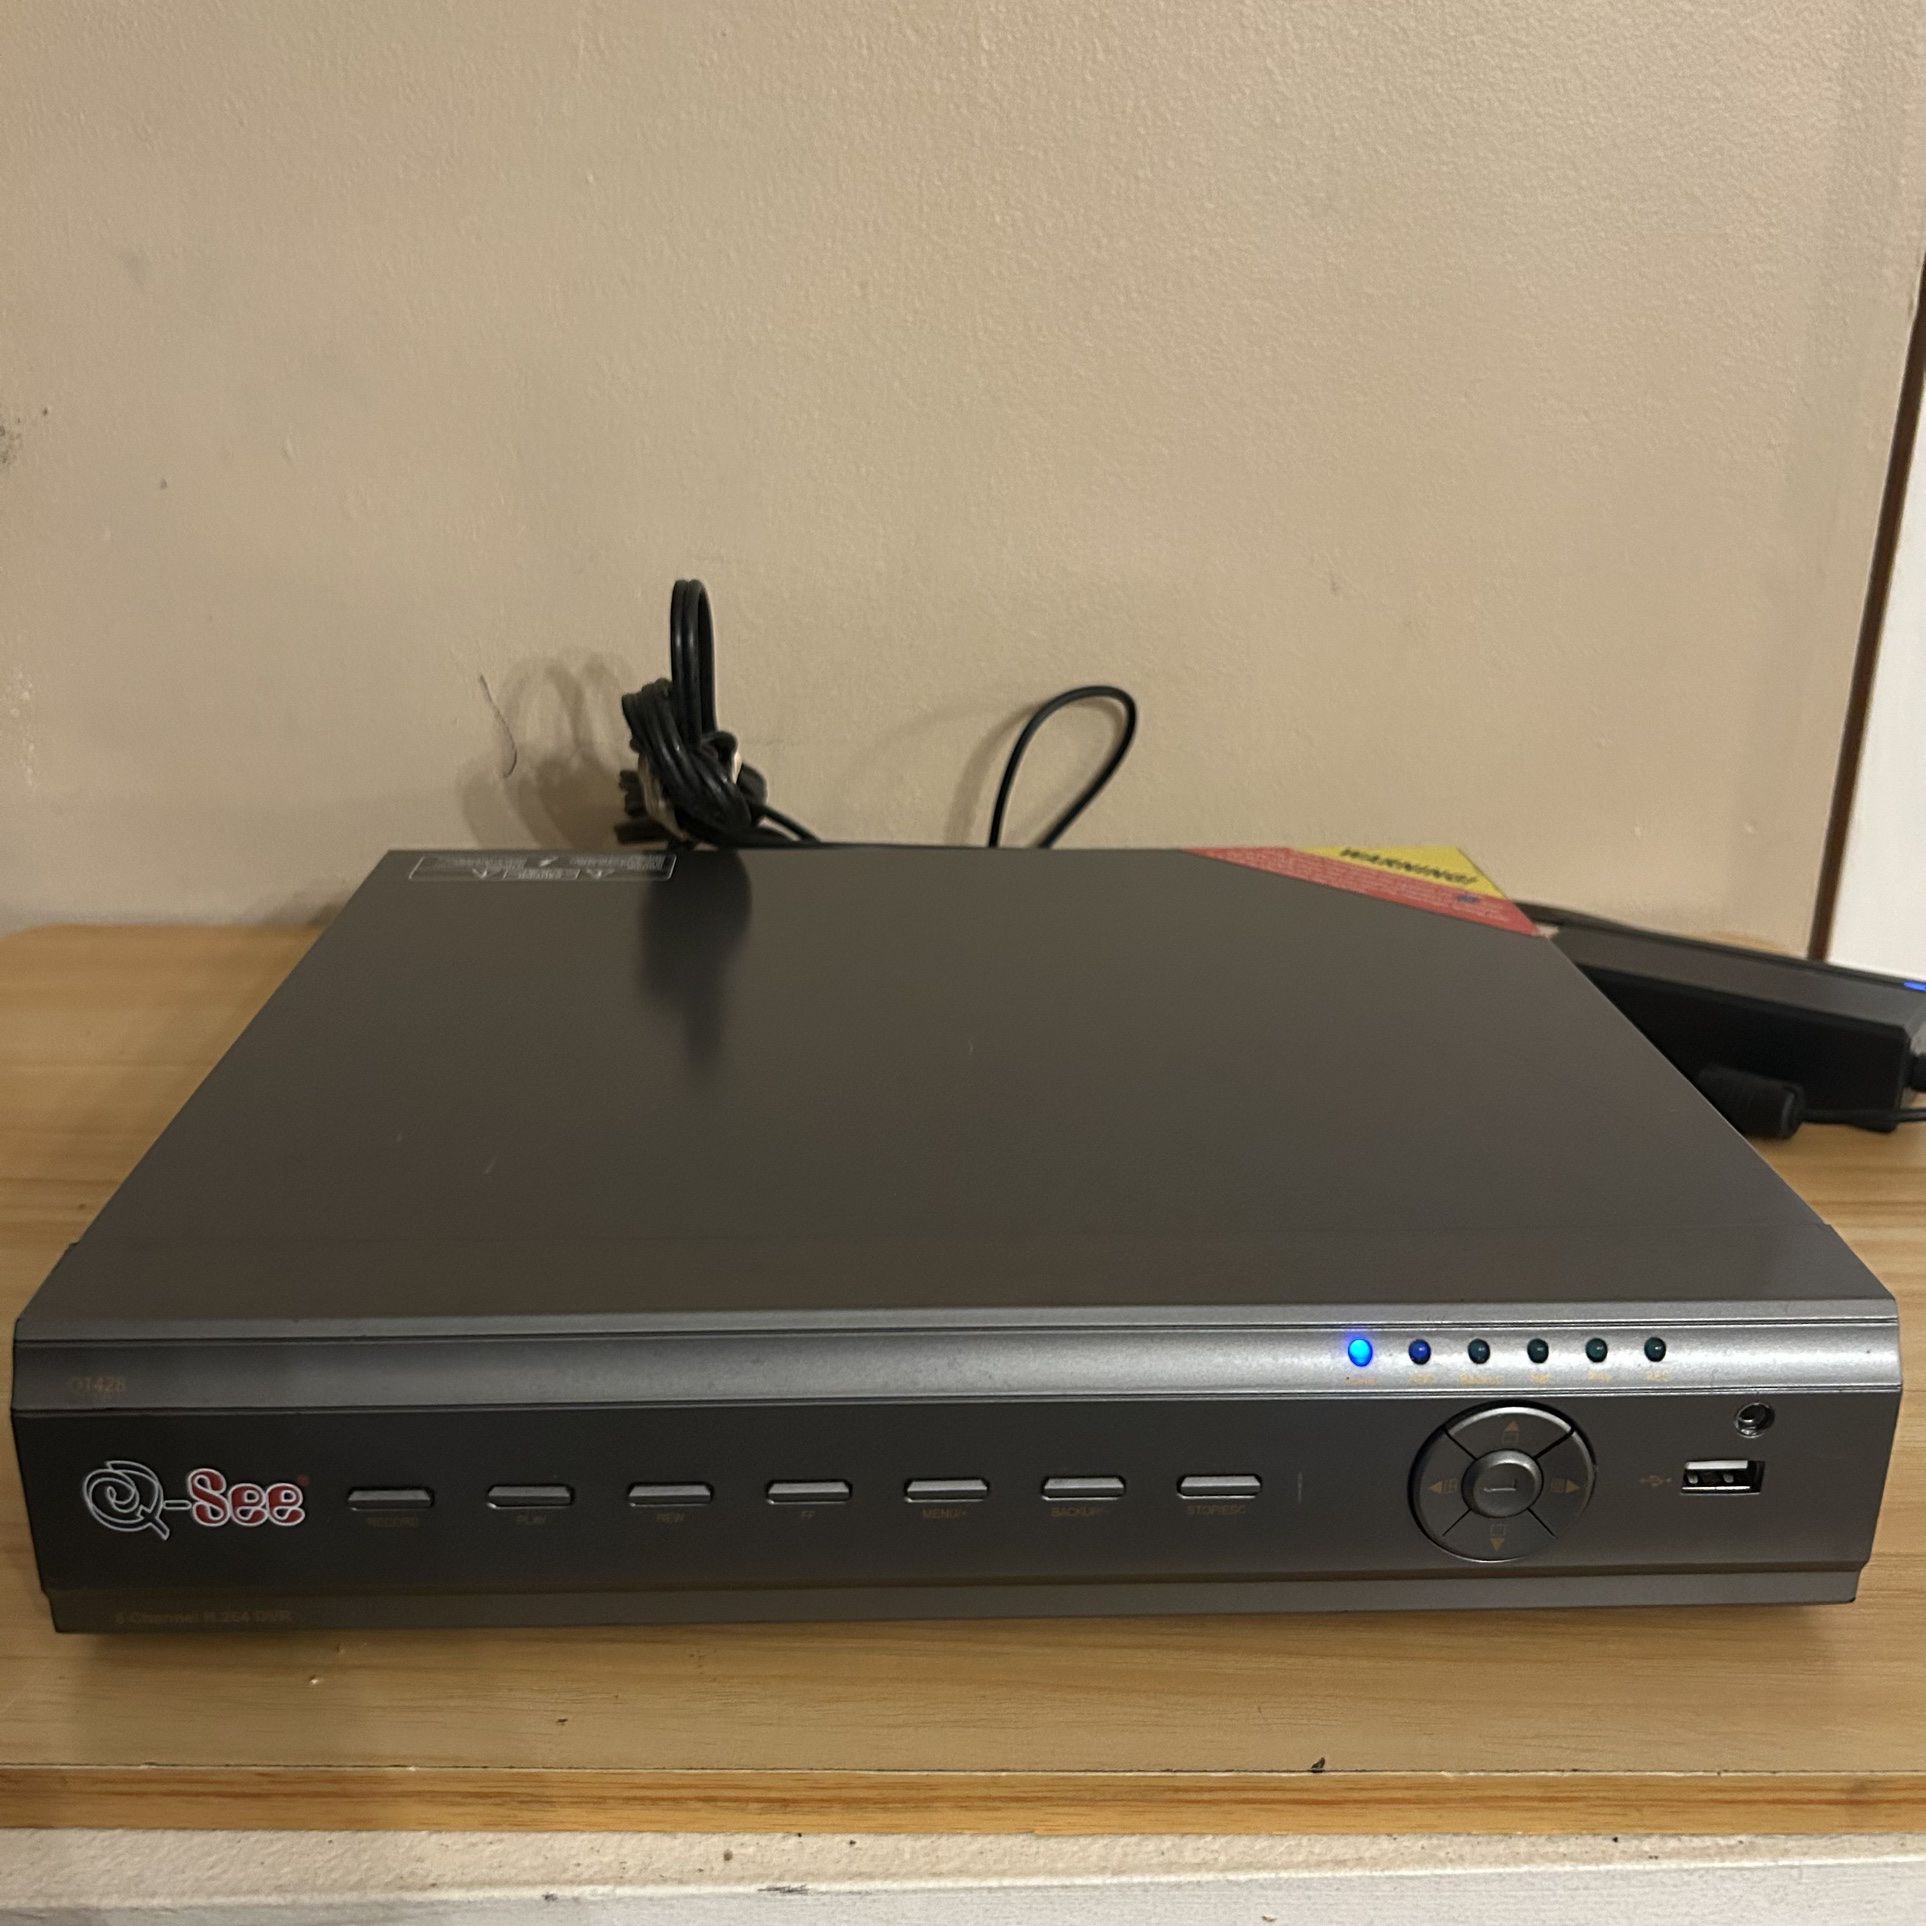 Q-See 8-Channel Digital Video Recorder Network DVR H.264 500GB QT428 Security